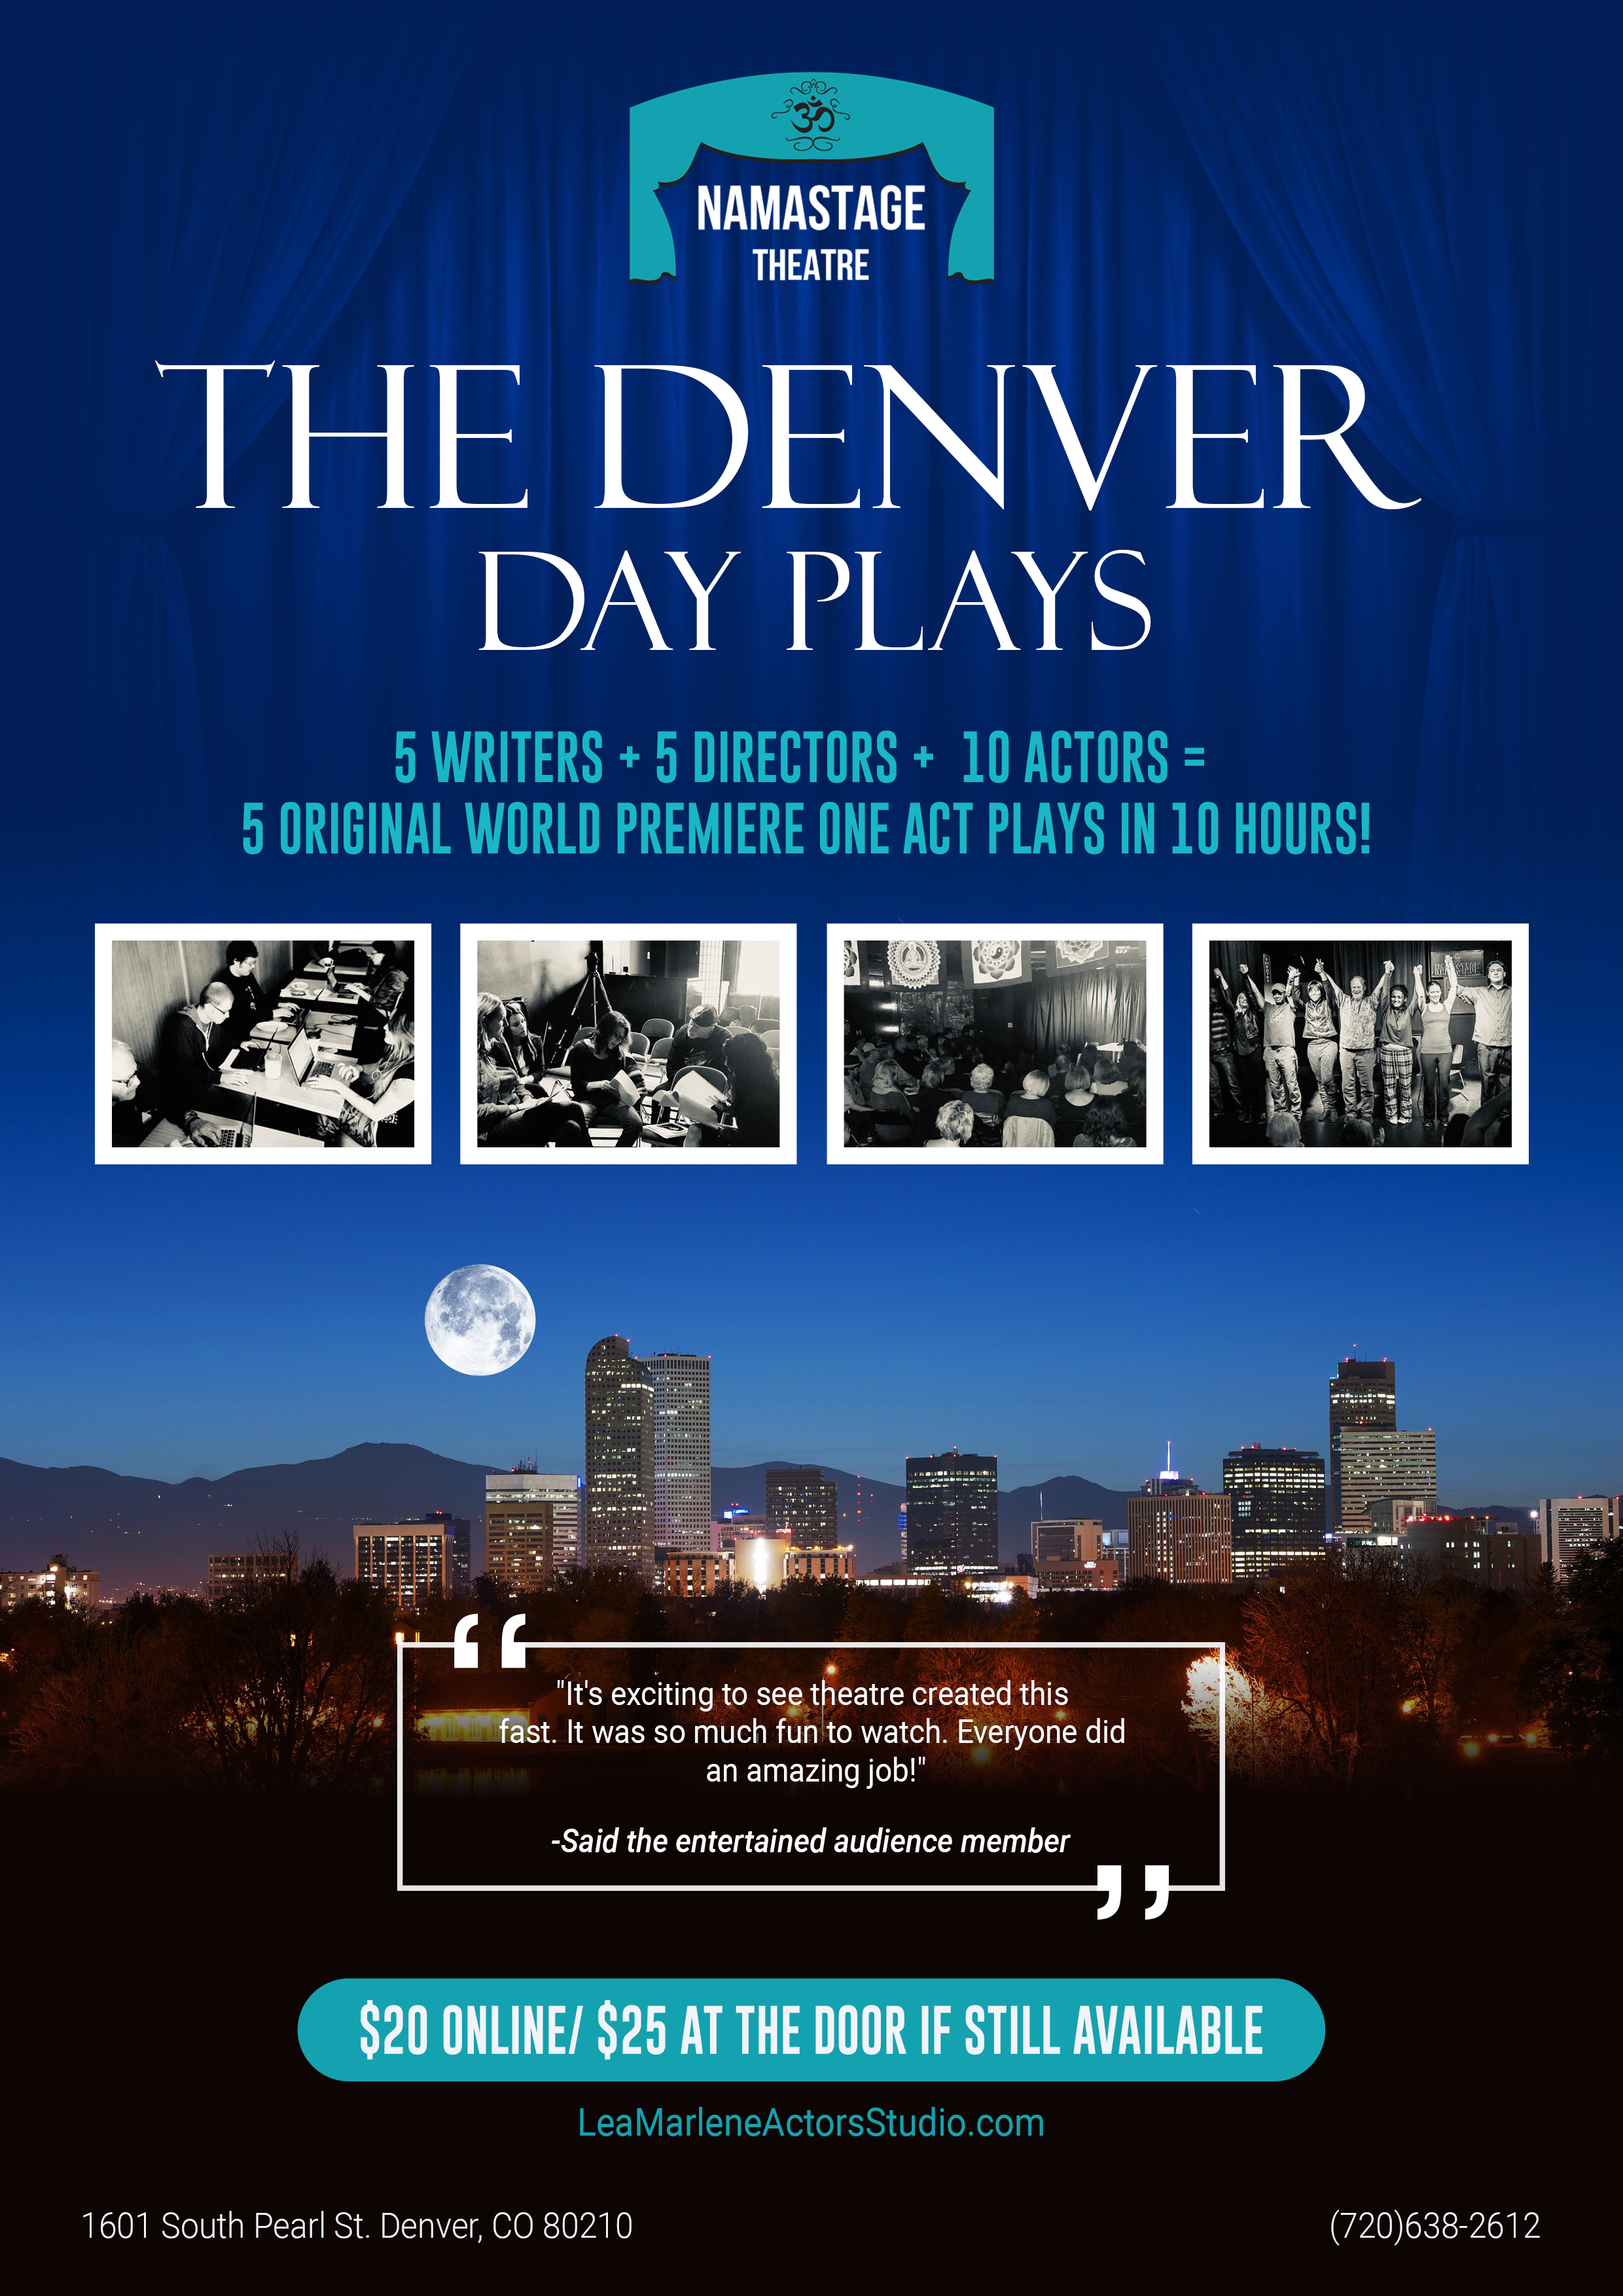 The Denver Day Plays